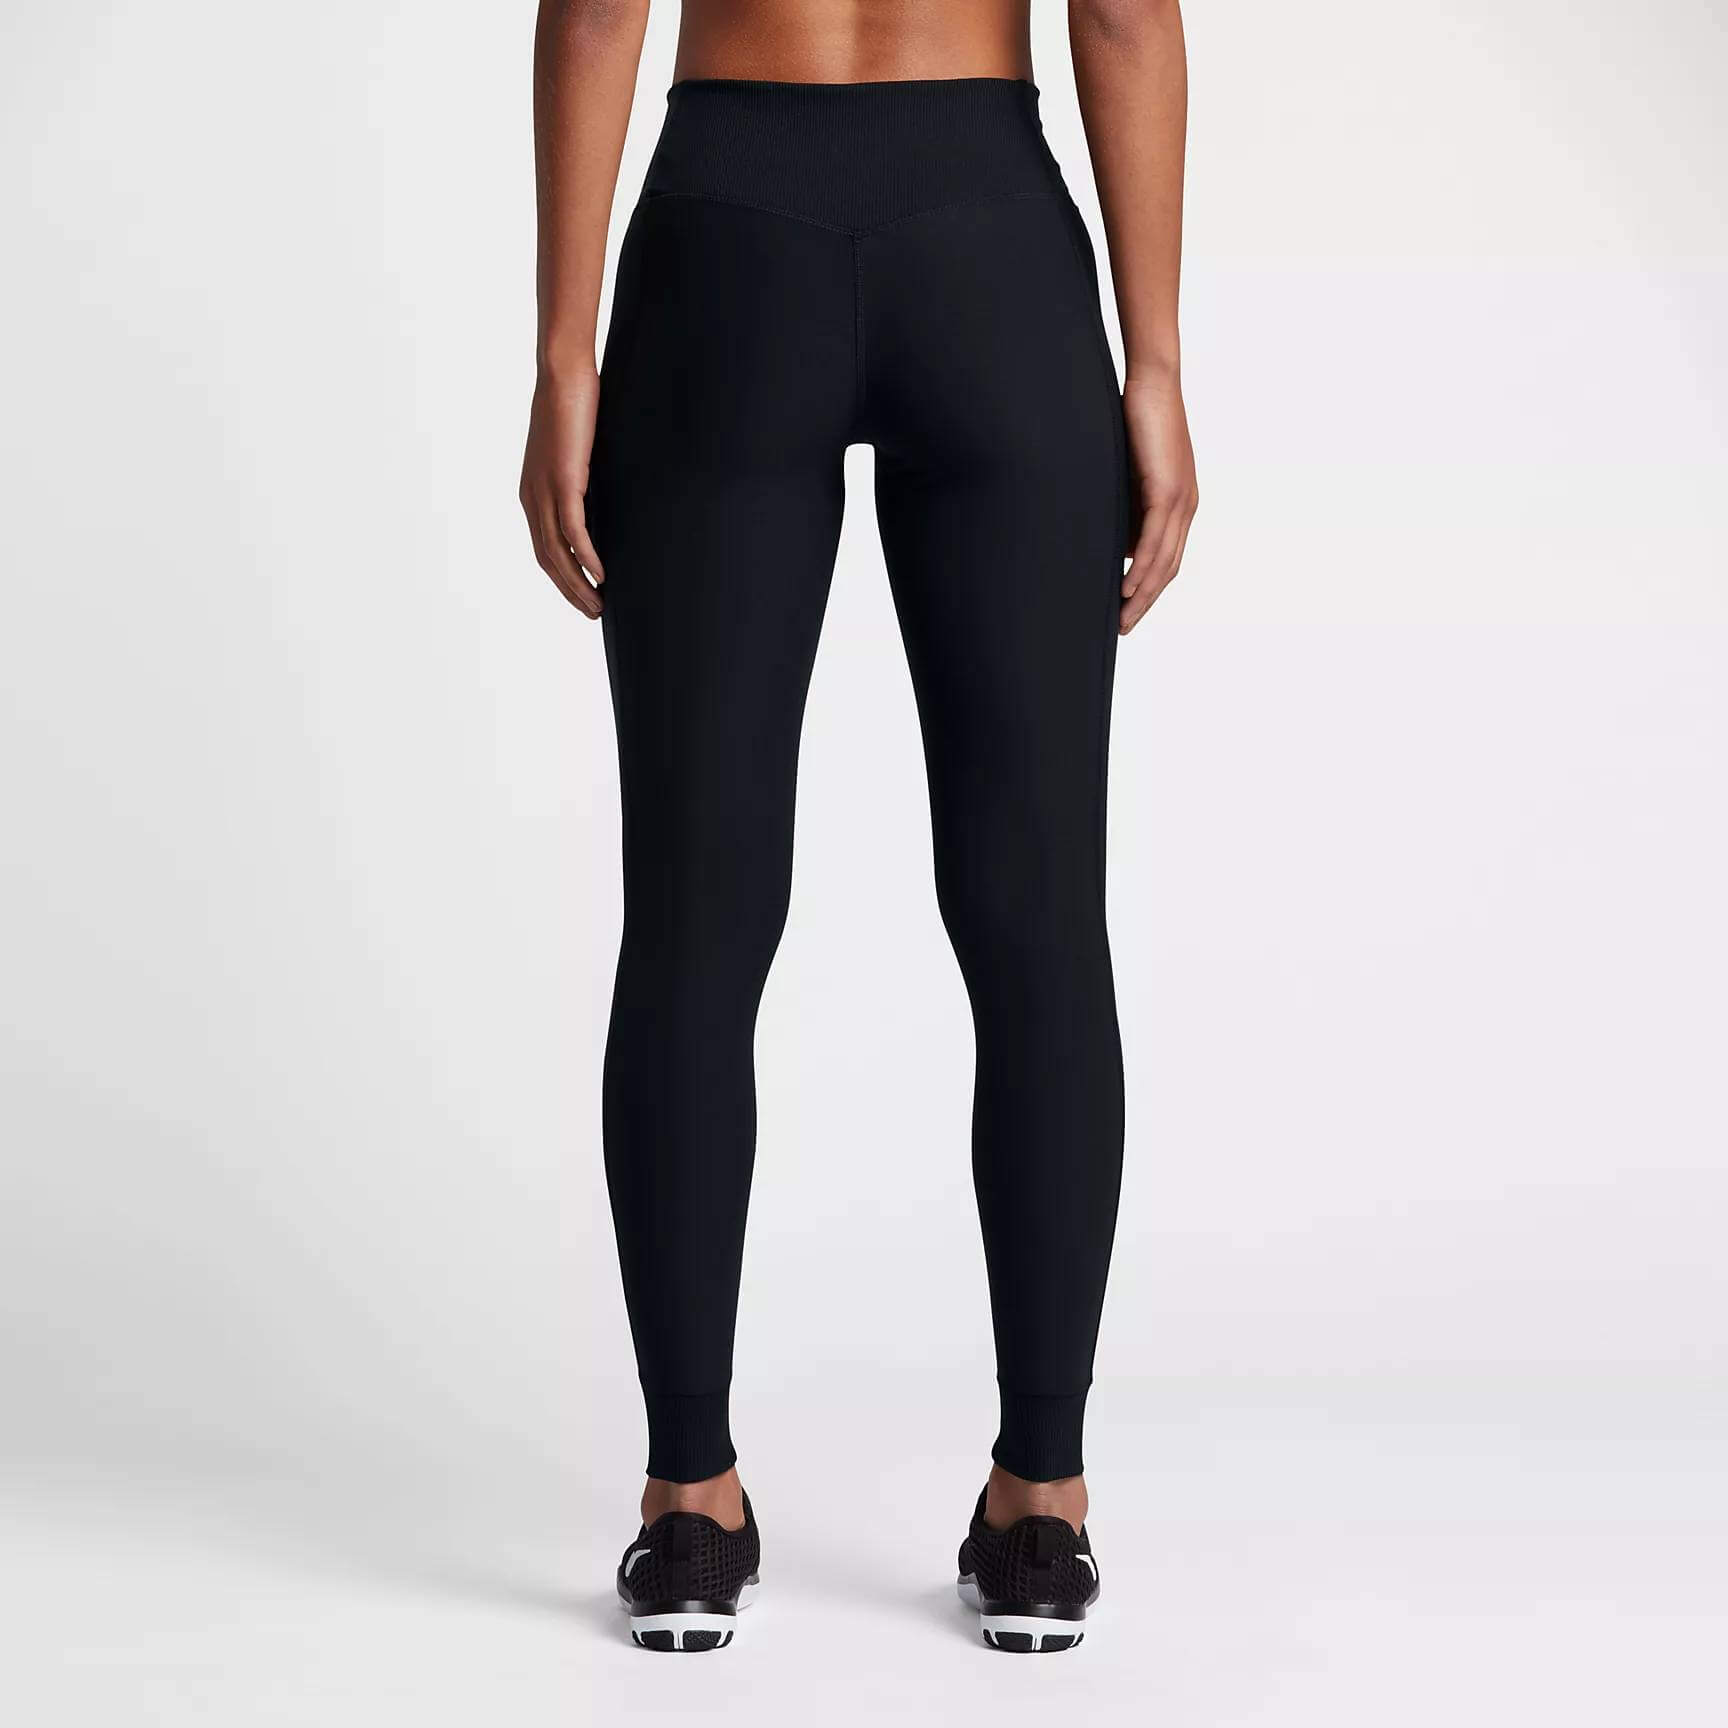 nike tights item power legend women - back side picture